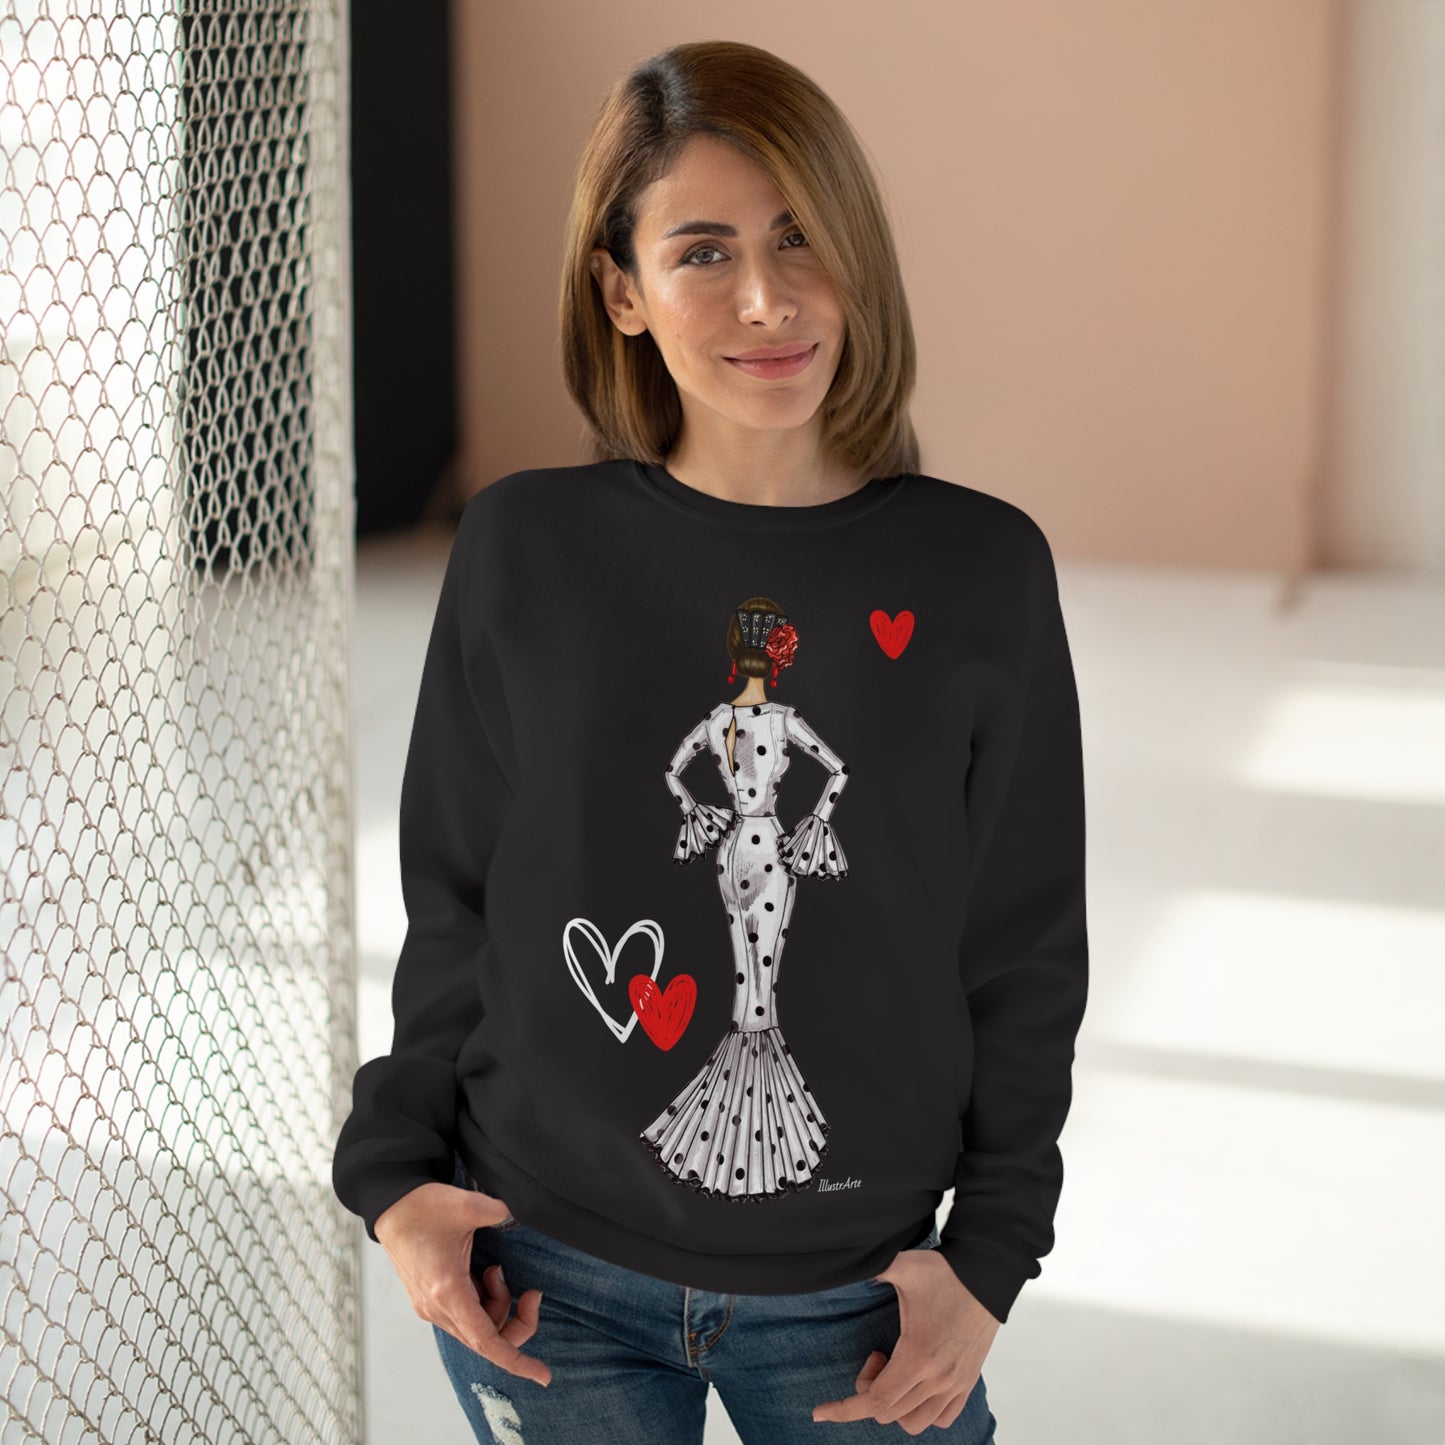 a woman wearing a sweater with a picture of a woman on it